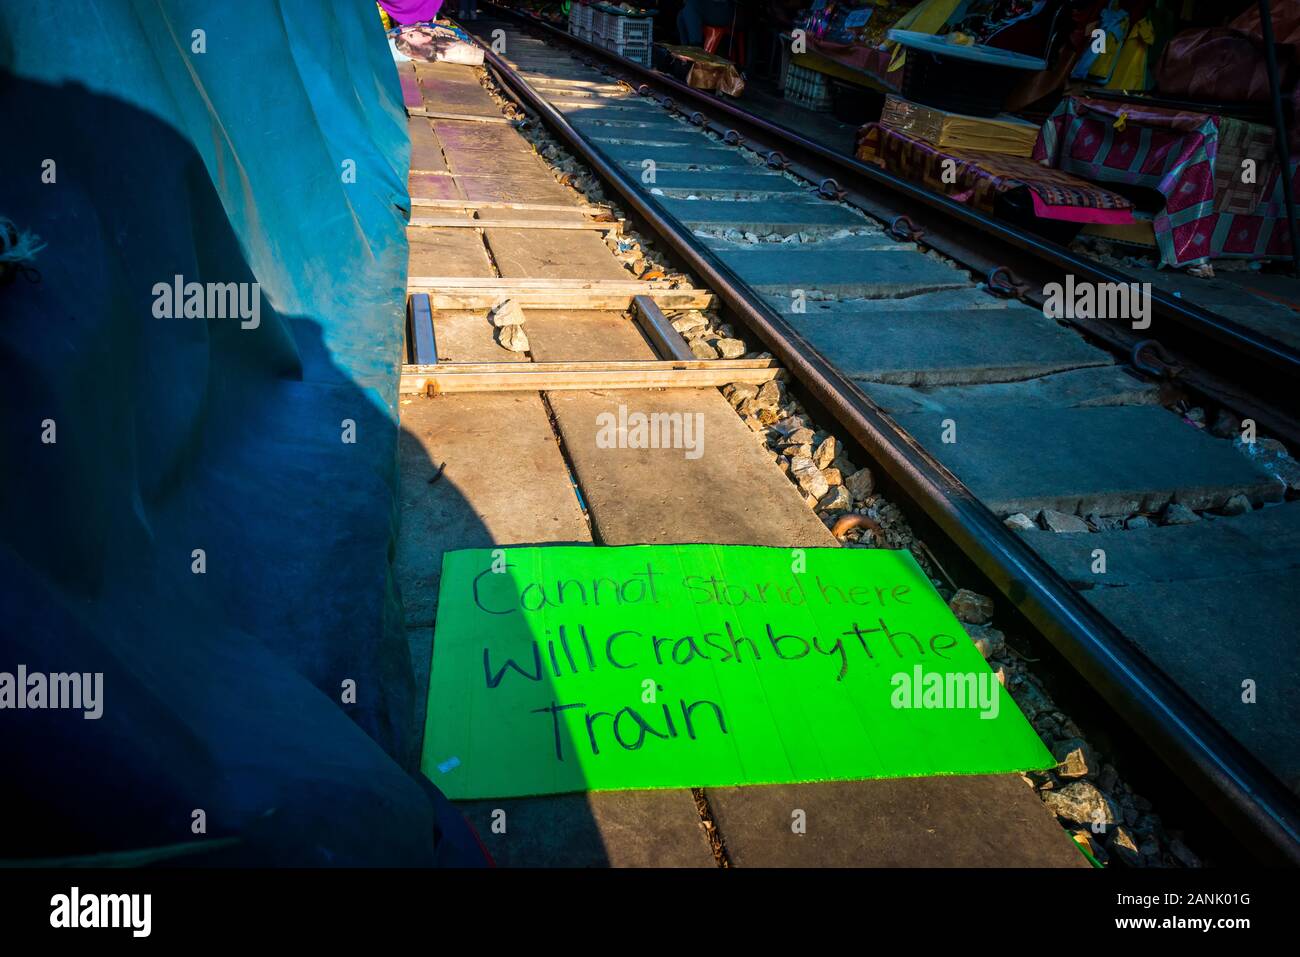 Mae Klong/Thailand-08December2019: Mae Klong train station with tracks and train passing through and a sign saying 'train will crash you' Stock Photo